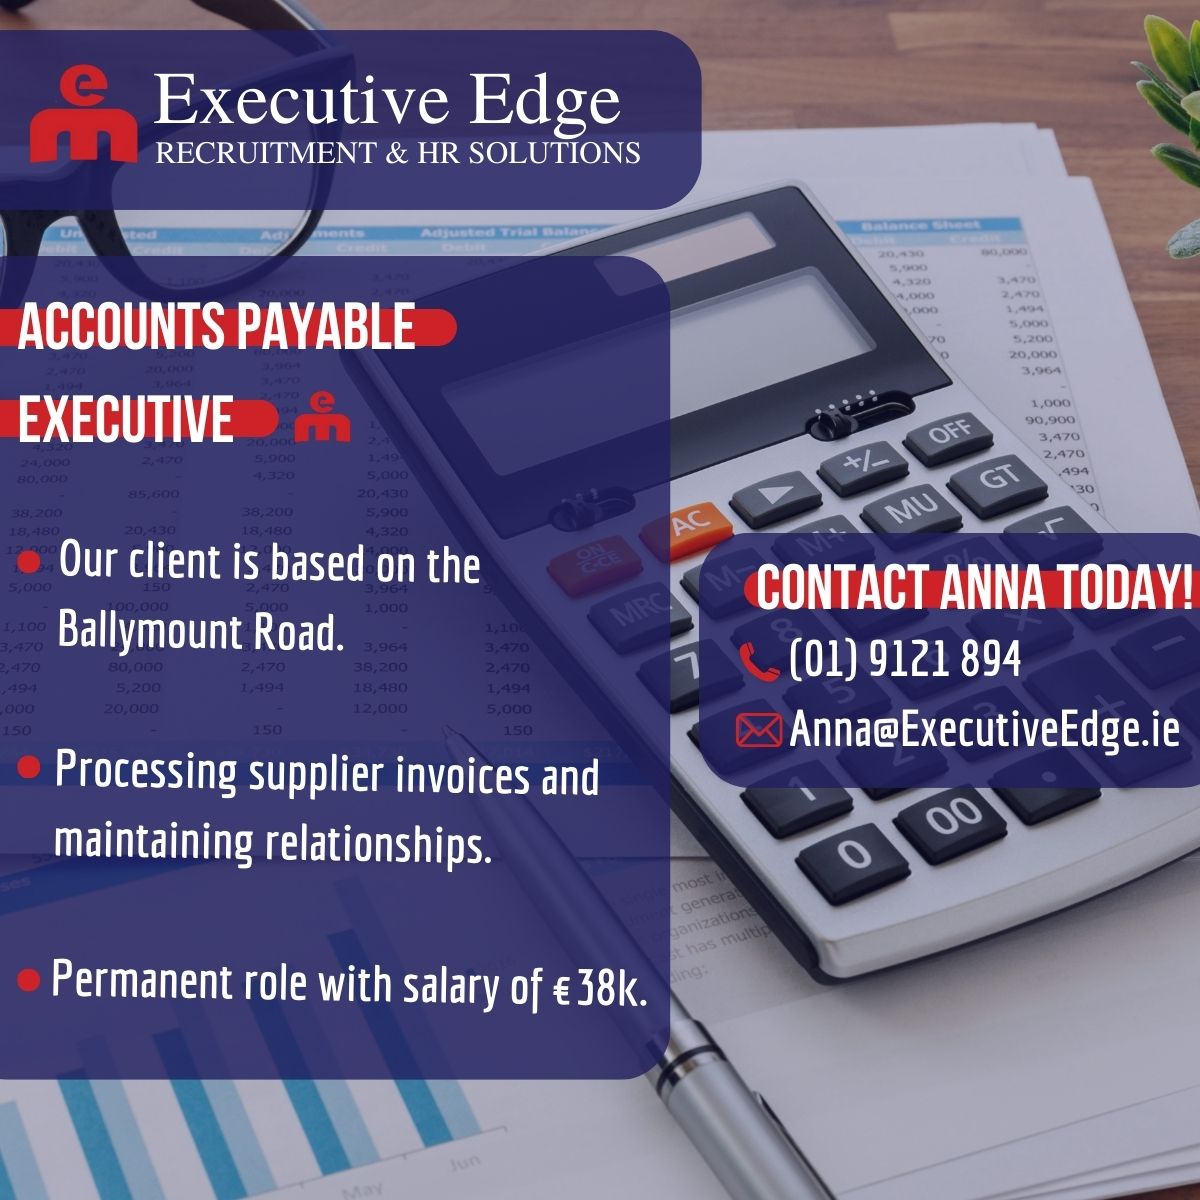 Anna is seeking an experienced Accounts Payable Executive for a client in Dublin 12. Chat to Anna today on (01) 9121 894!
Find out more at: executiveedge.ie/job/accounts-p…
#DublinJobs